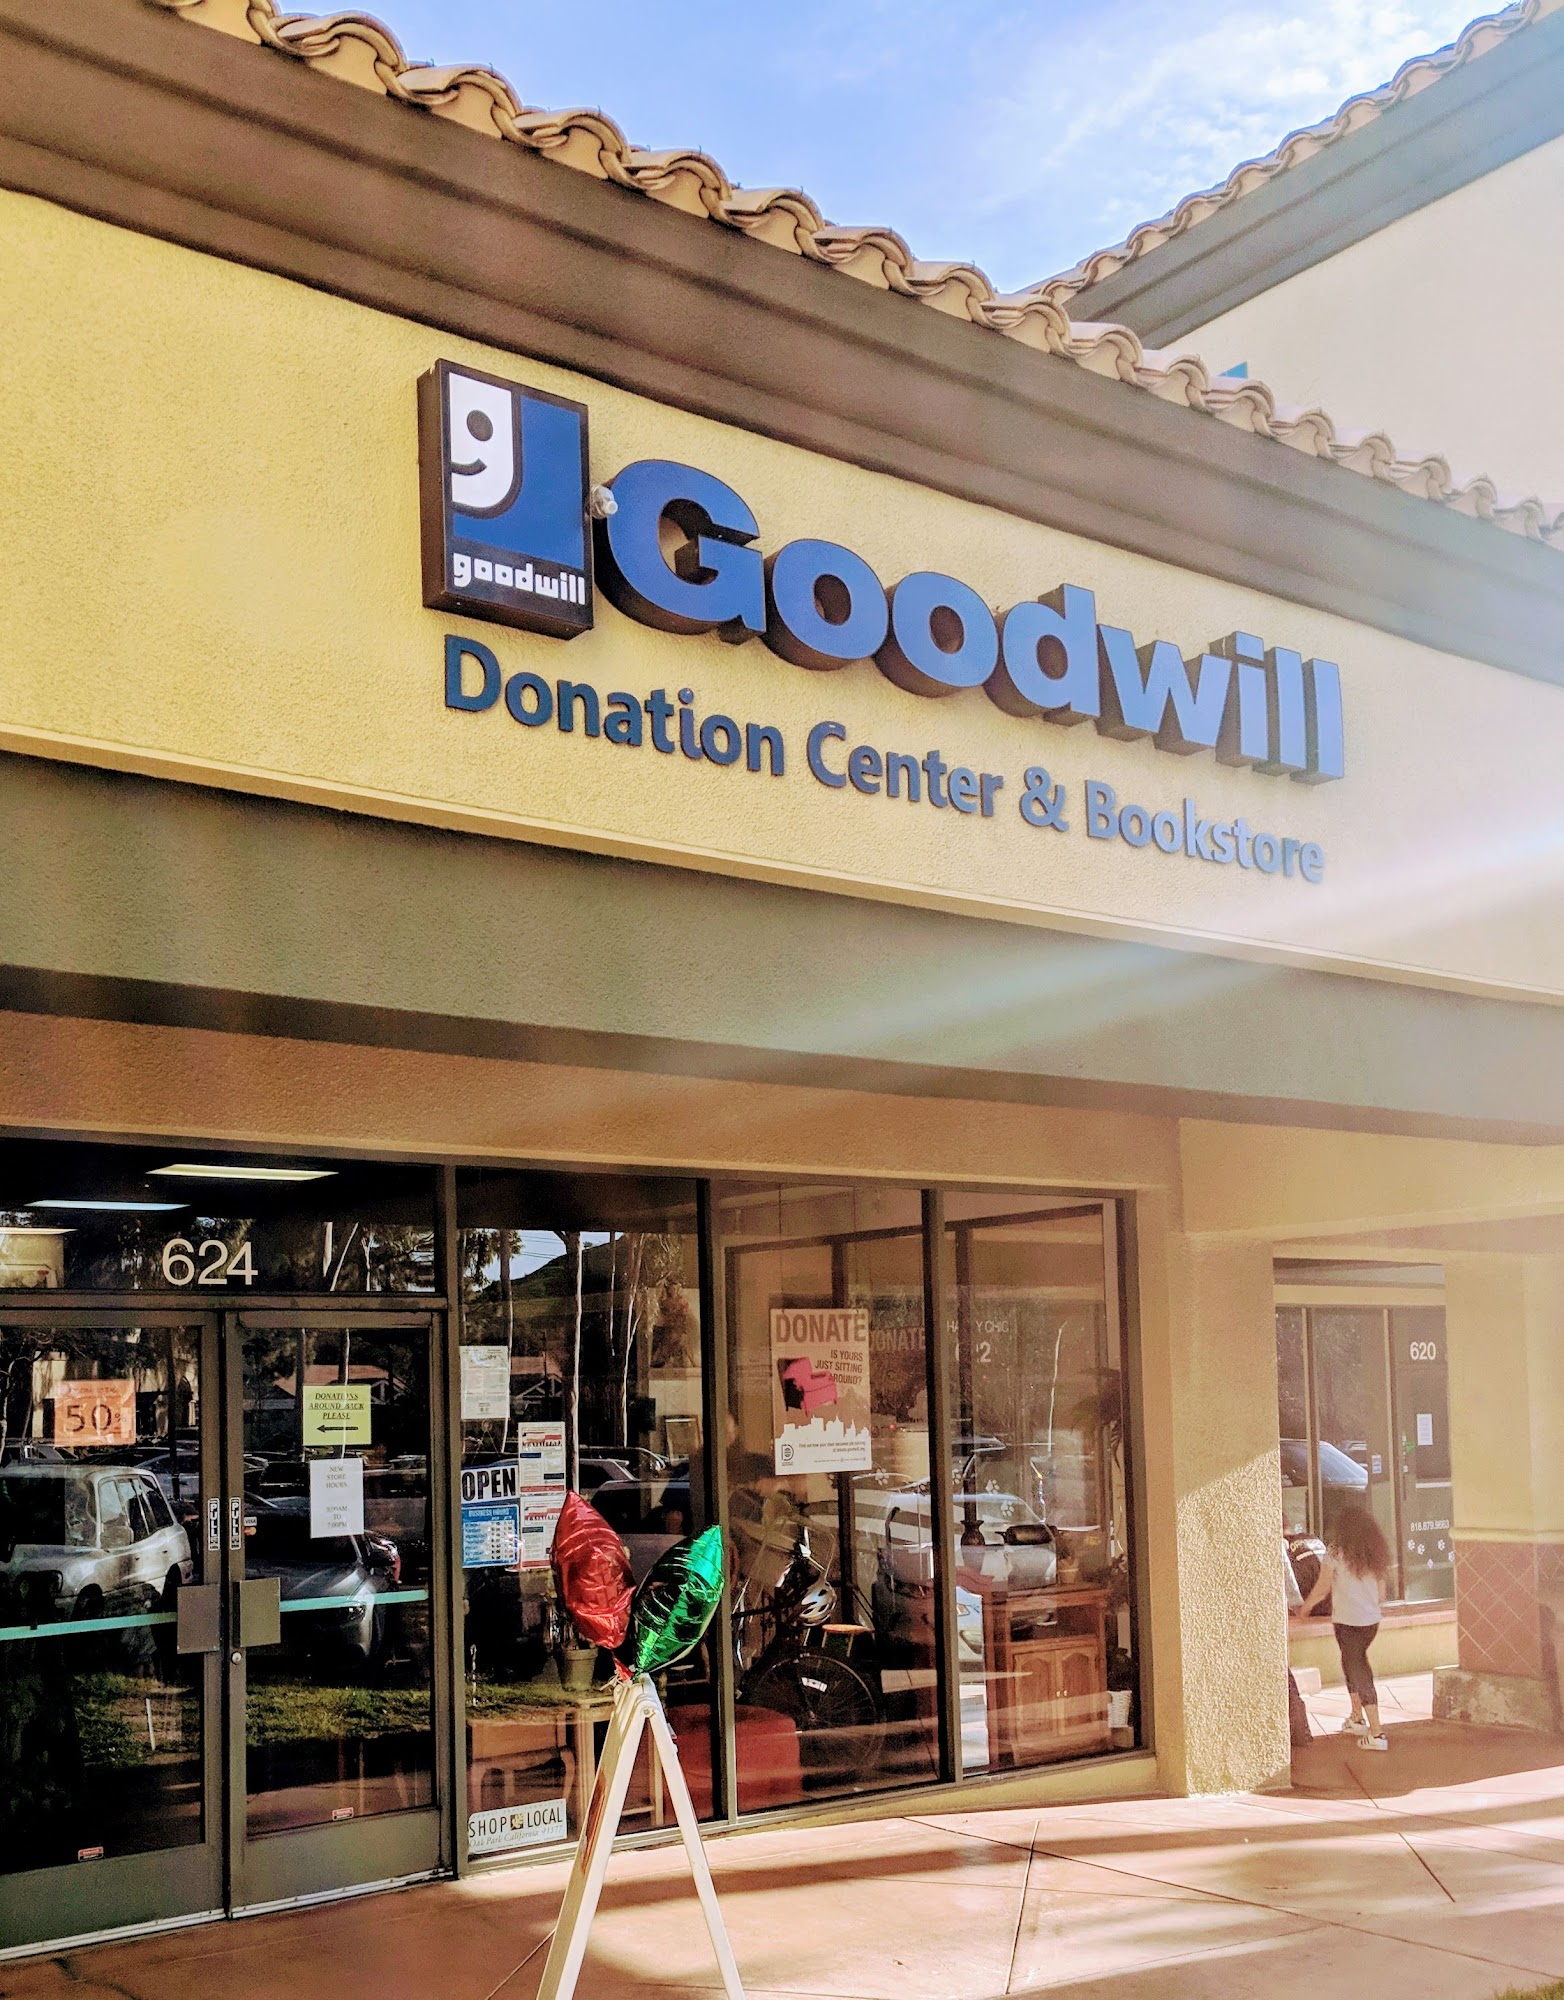 Goodwill Select Store and Donation Center - Oak Park